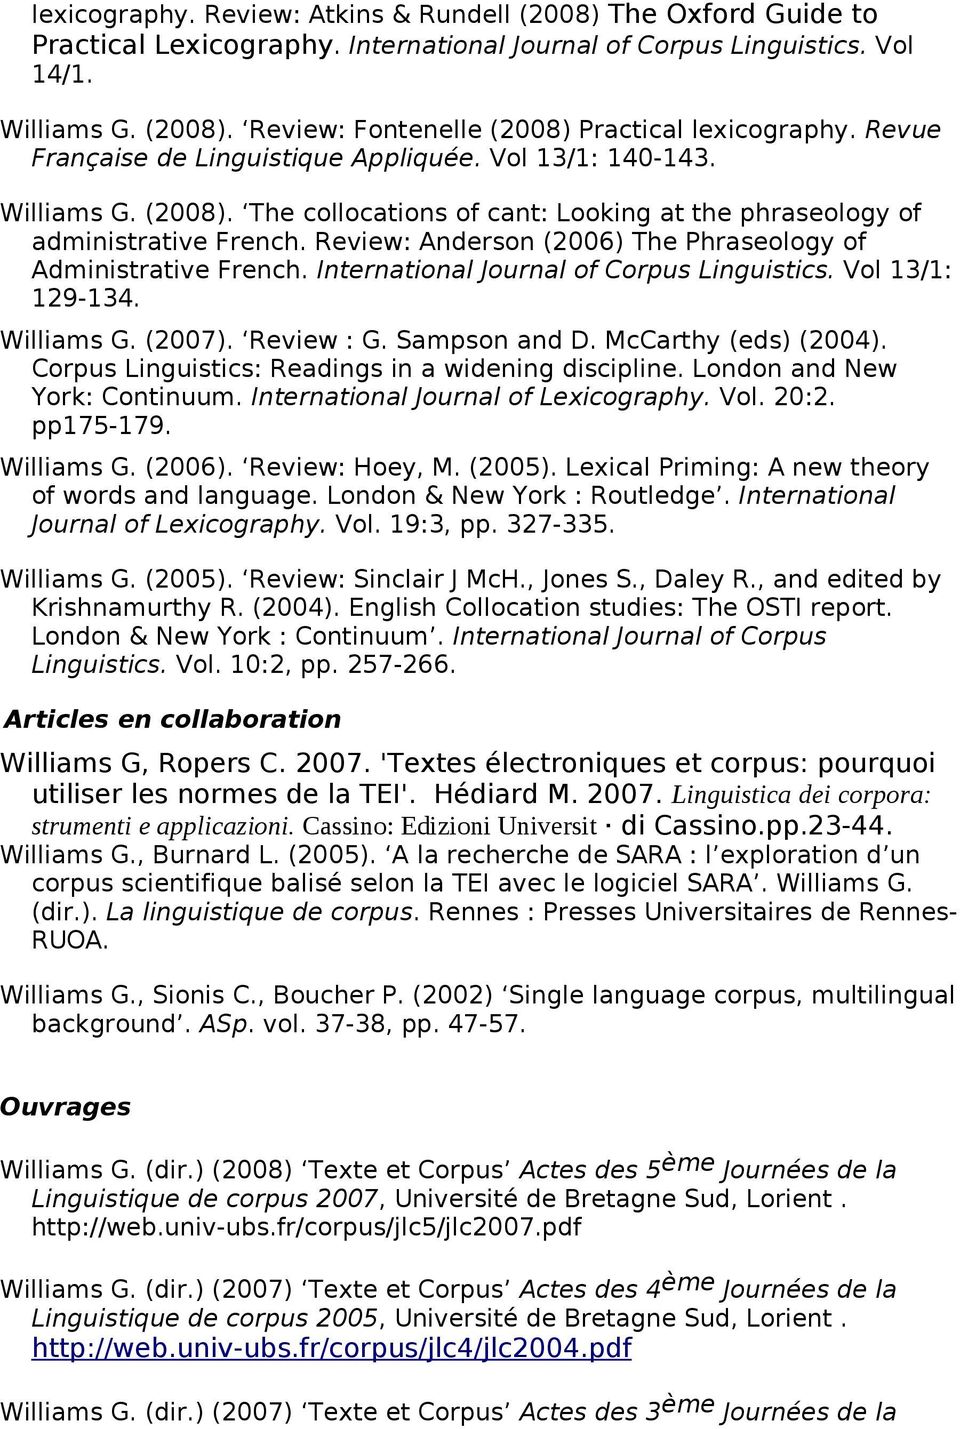 Review: Anderson (2006) The Phraseology of Administrative French. International Journal of Corpus Linguistics. Vol 13/1: 129-134. Williams G. (2007). Review : G. Sampson and D. McCarthy (eds) (2004).